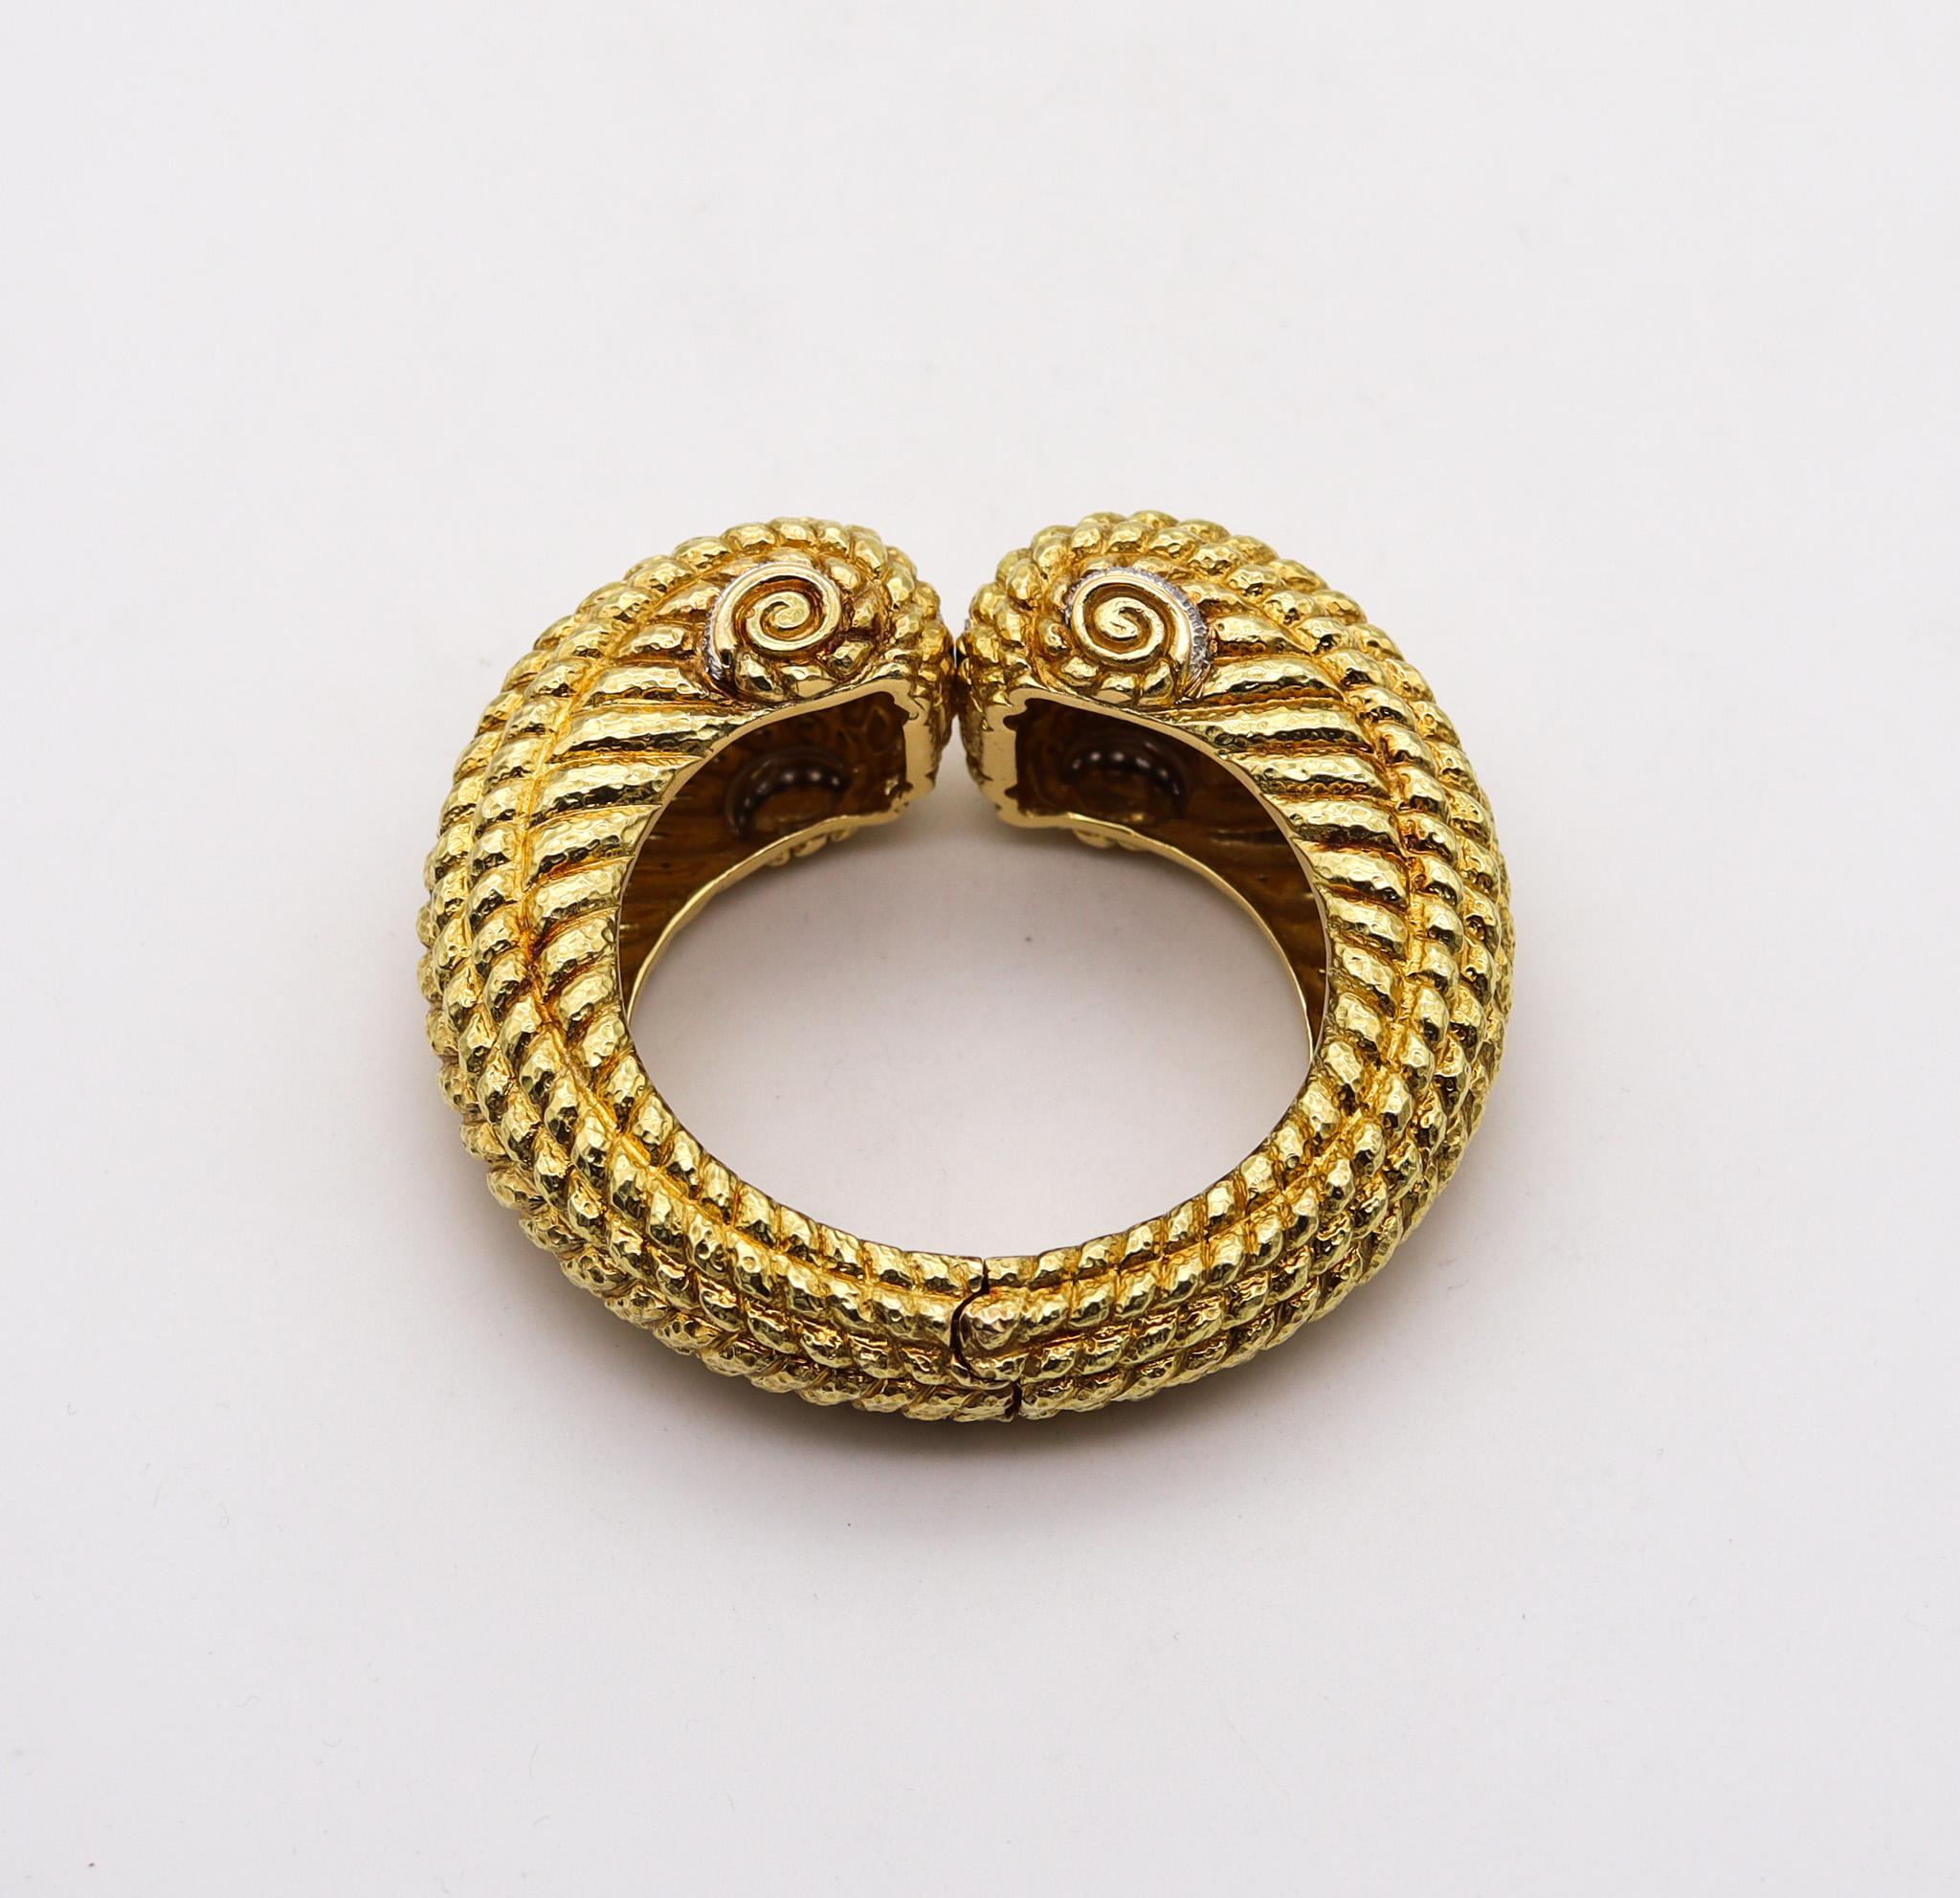 Modernist David Webb 1960 Bangle Bracelet in 18kt Yellow Gold with 9.52 Ctw in Diamonds For Sale